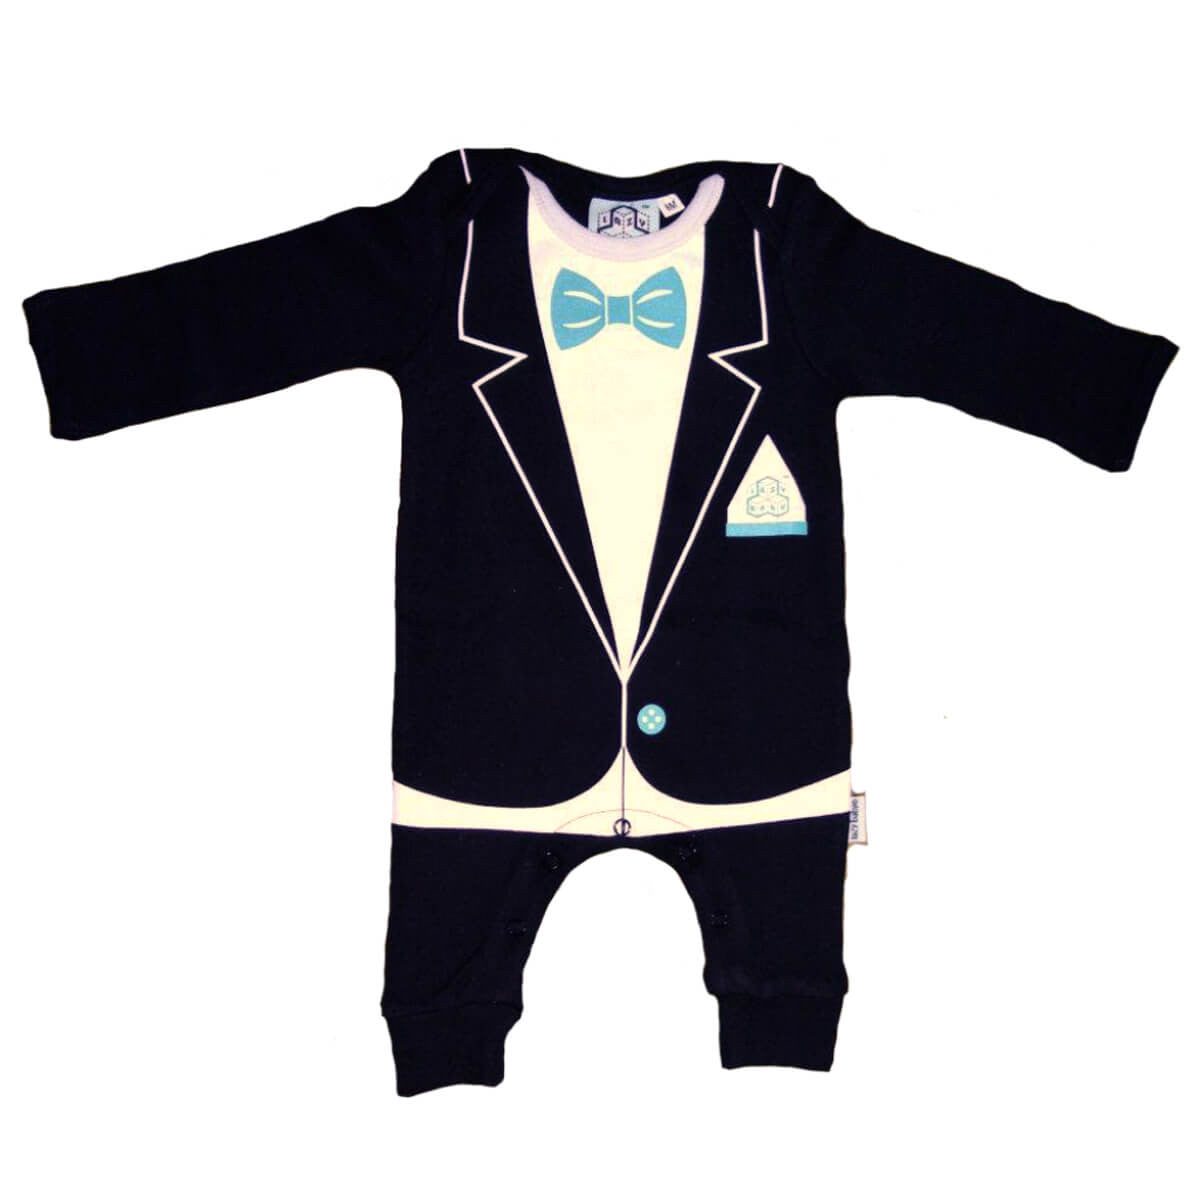 Lazy Baby, Christening, Wedding or Party Baby Outfit - Baby Grow Suit - Lazy Baby